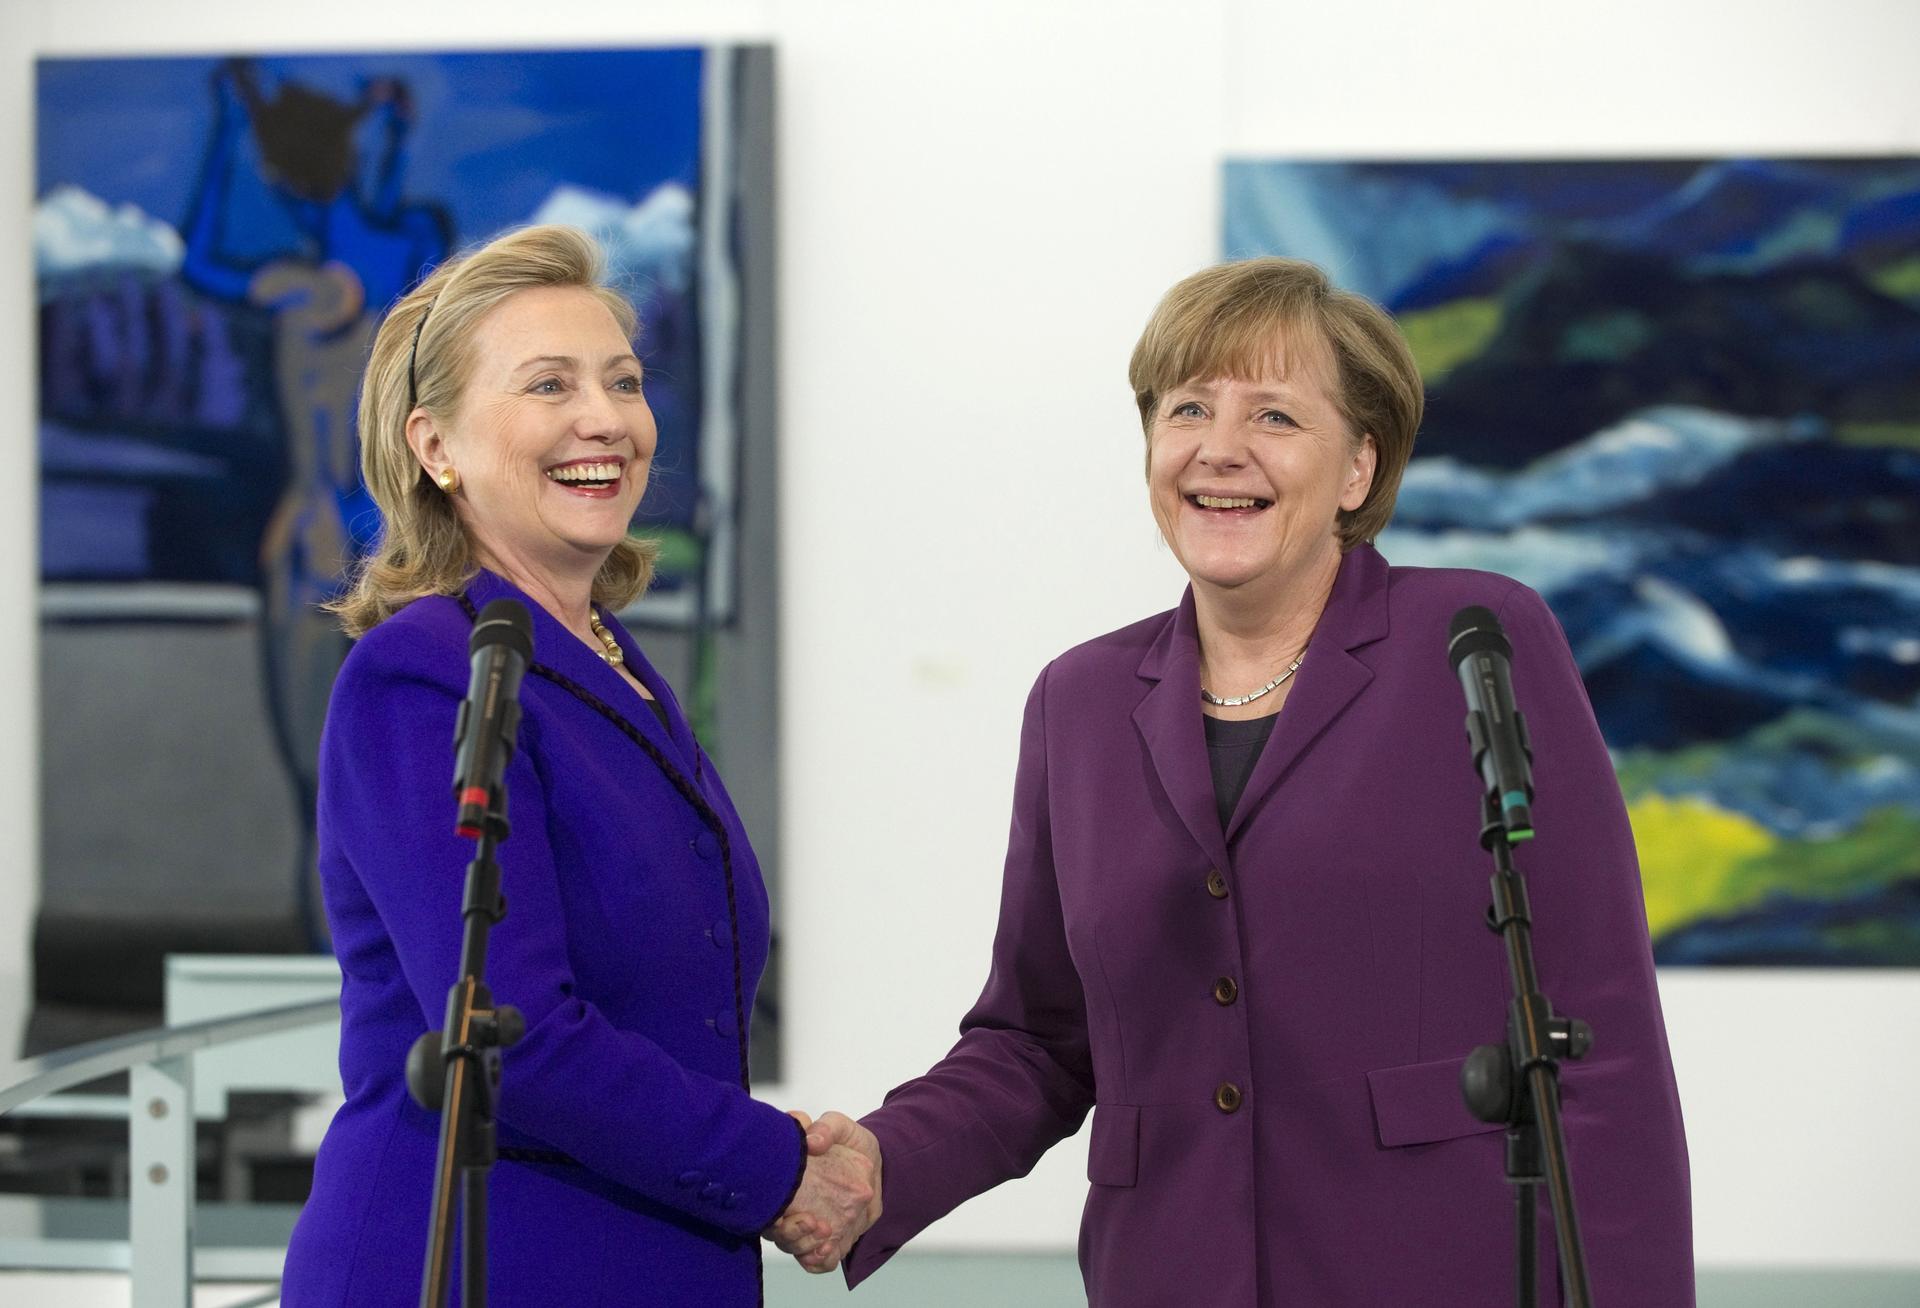 German Chancellor Angela Merkel shakes hands with US Secretary of State Hillary Clinton (L) prior to a meeting at the Chancellery in Berlin April 14, 2011.